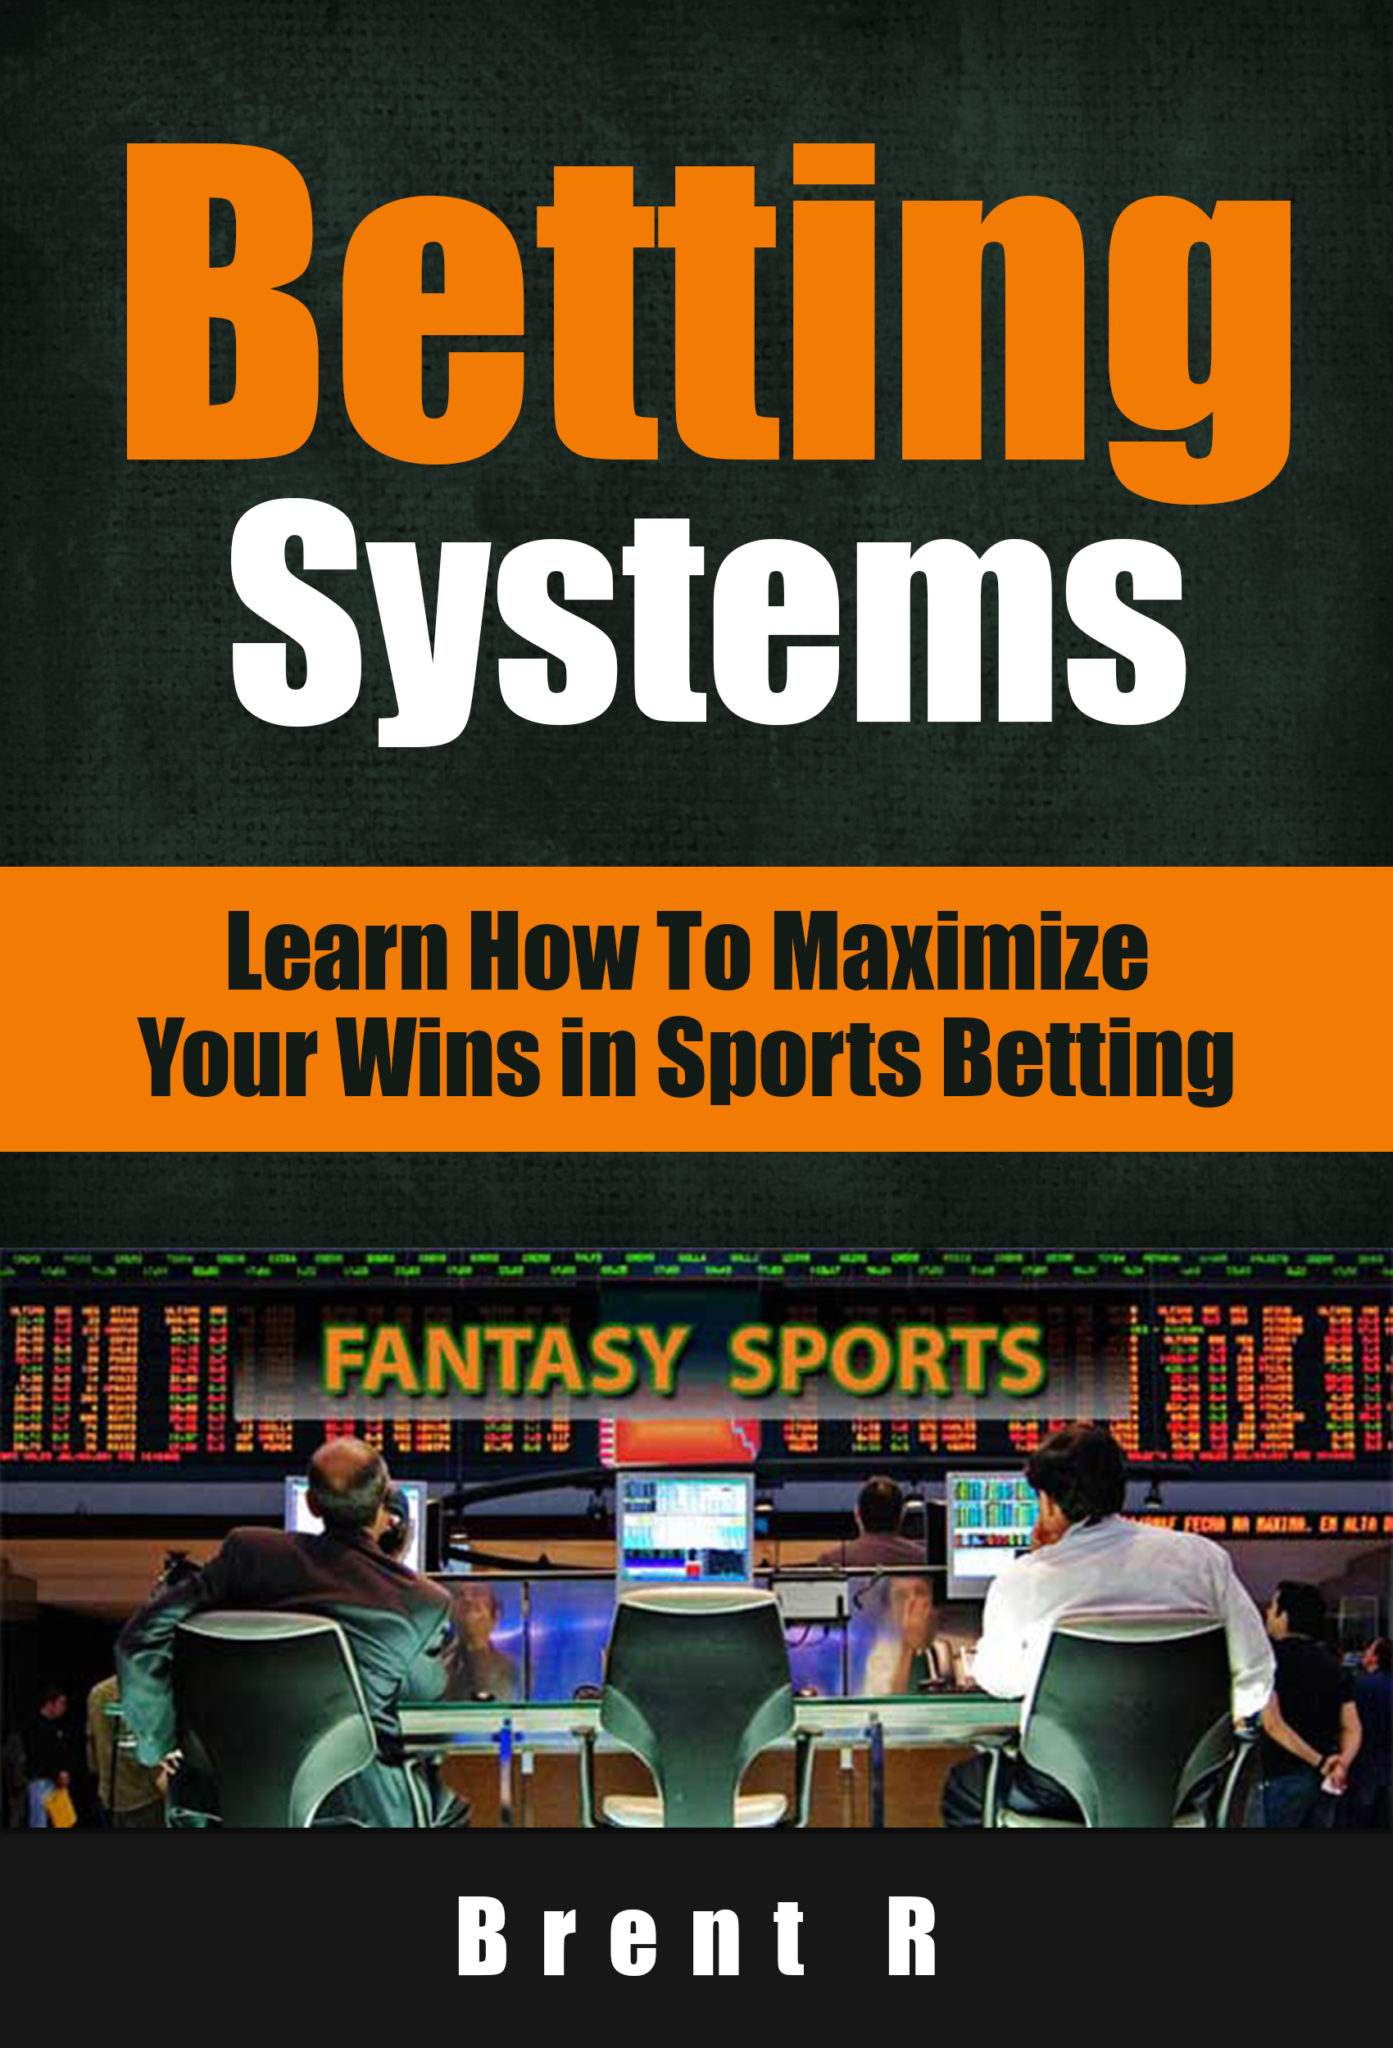 FREE: Betting Systems: Learn a Gambling Strategy to Maximize your Wins in Sports Betting by Brent R